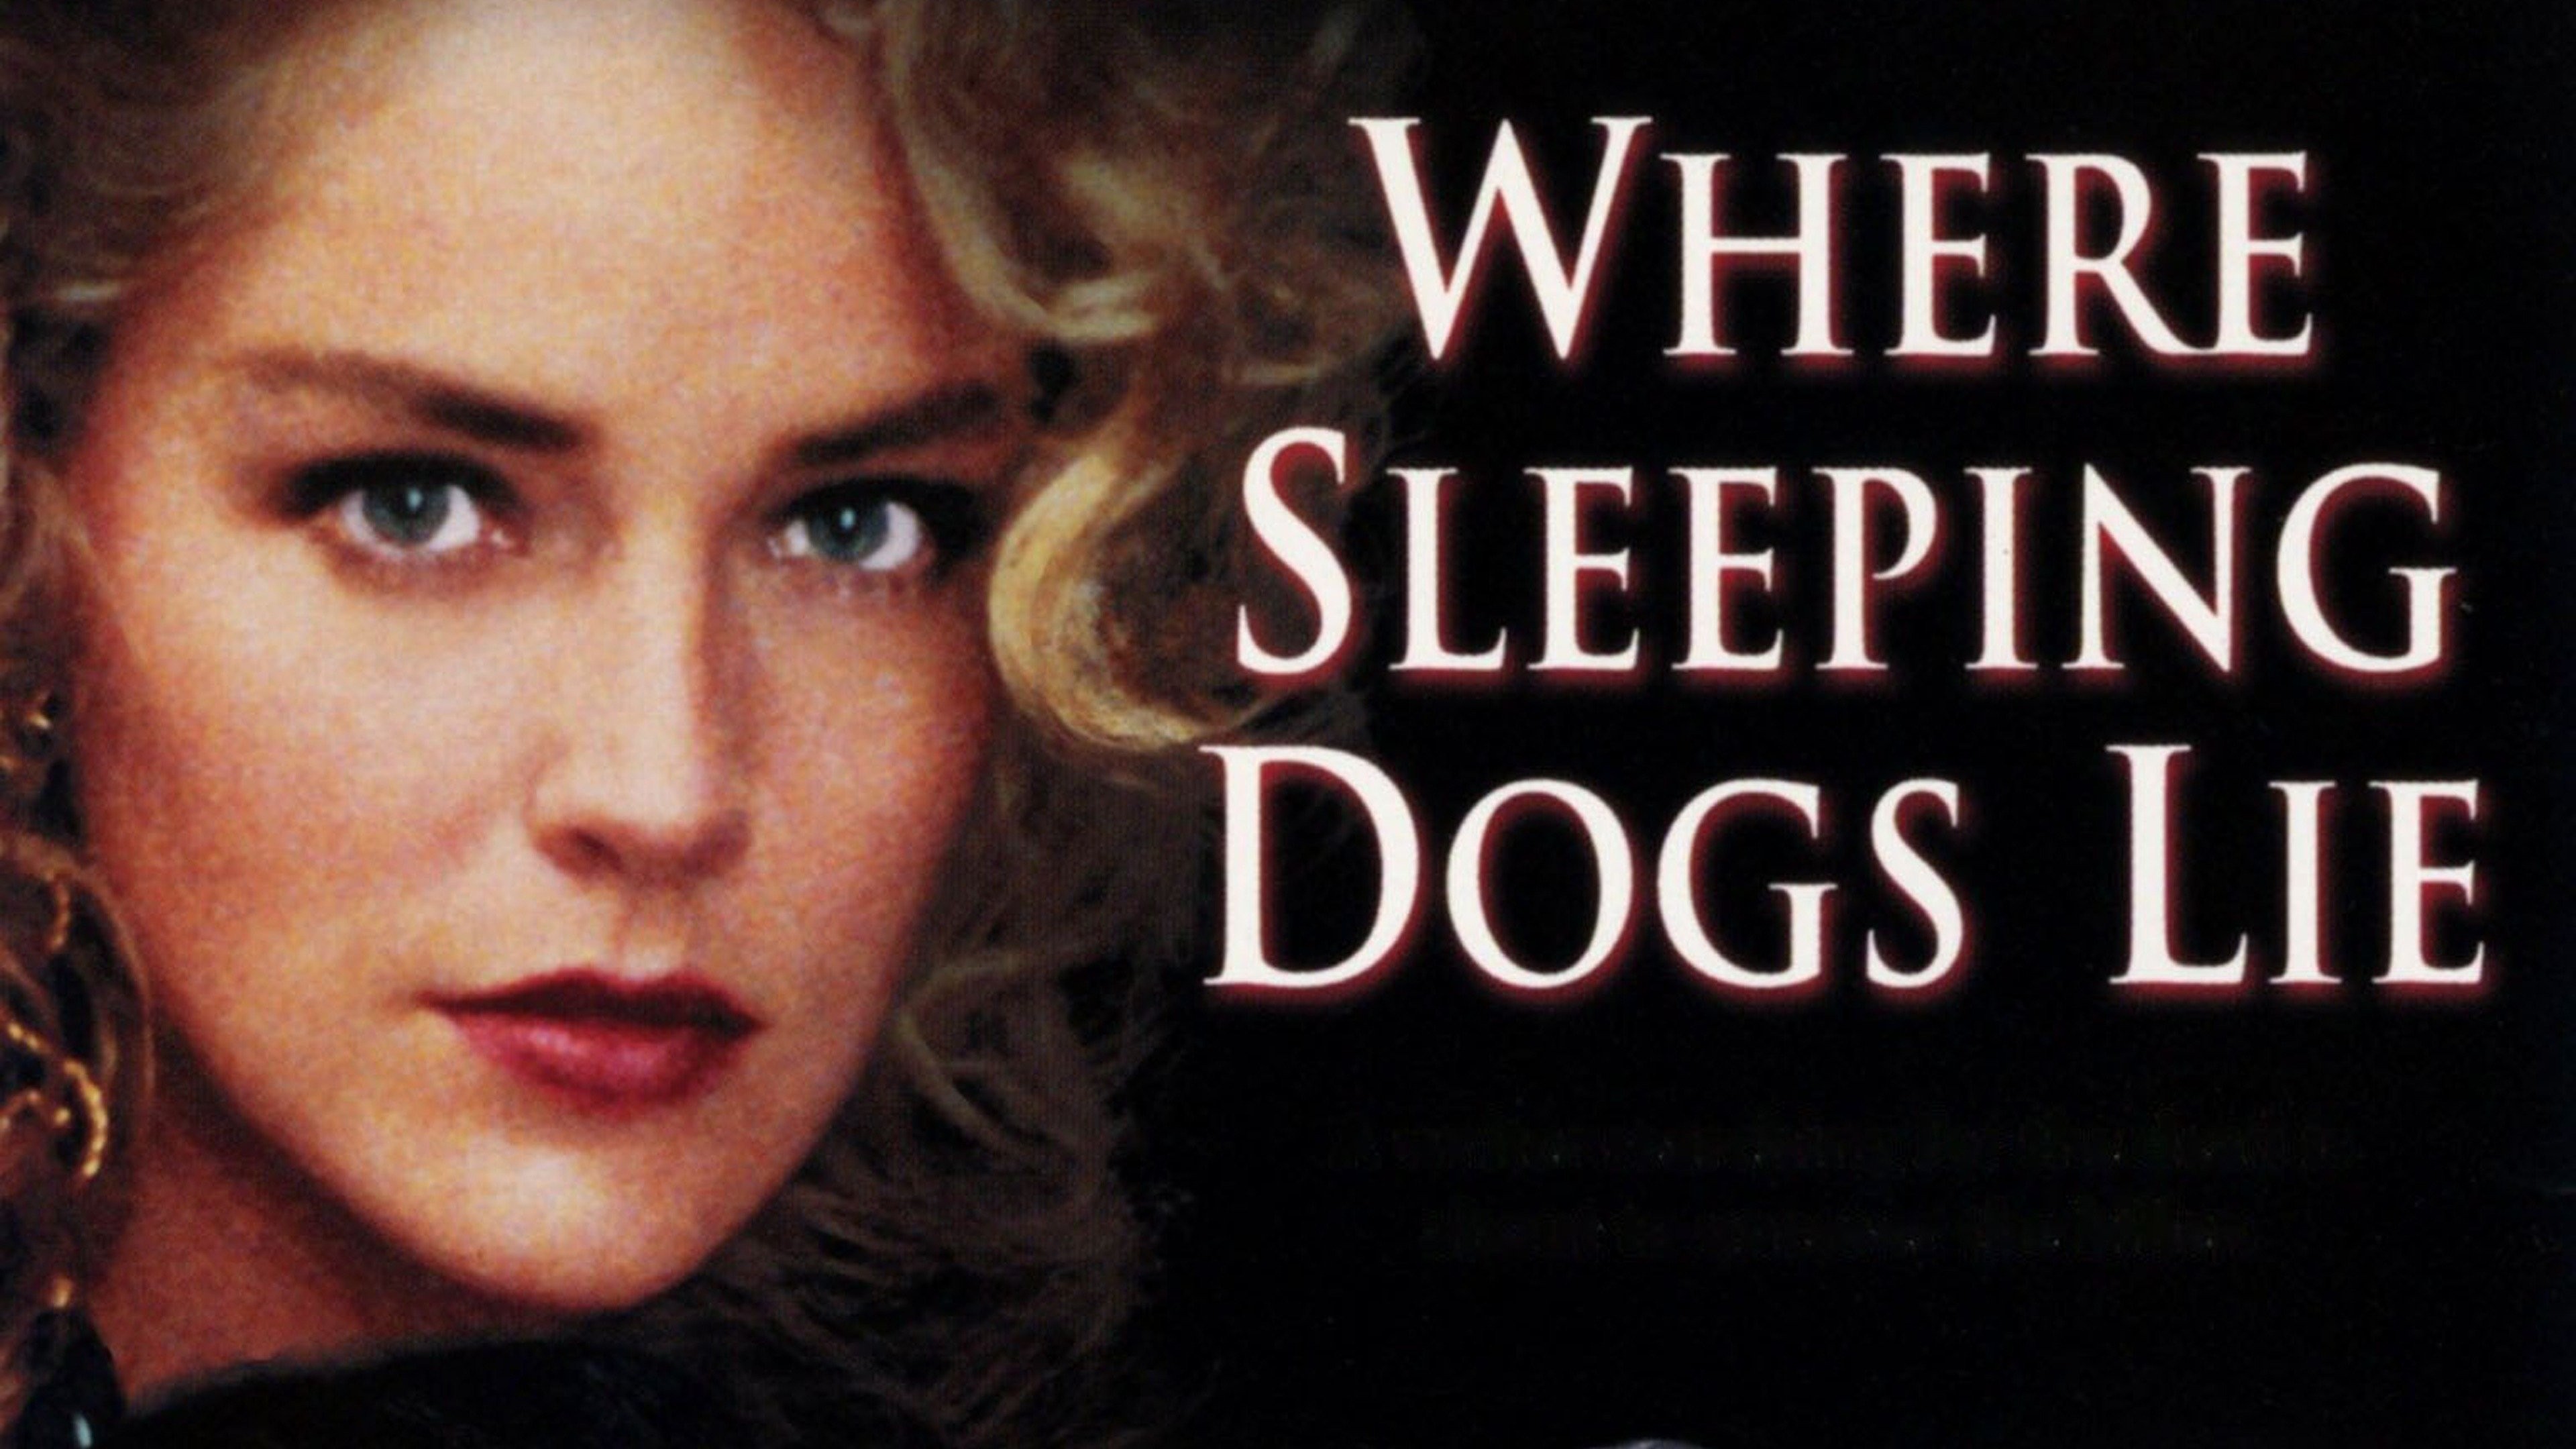 RELEASE DATE: 13 November 1991. MOVIE TITLE: Where Sleeping Dogs